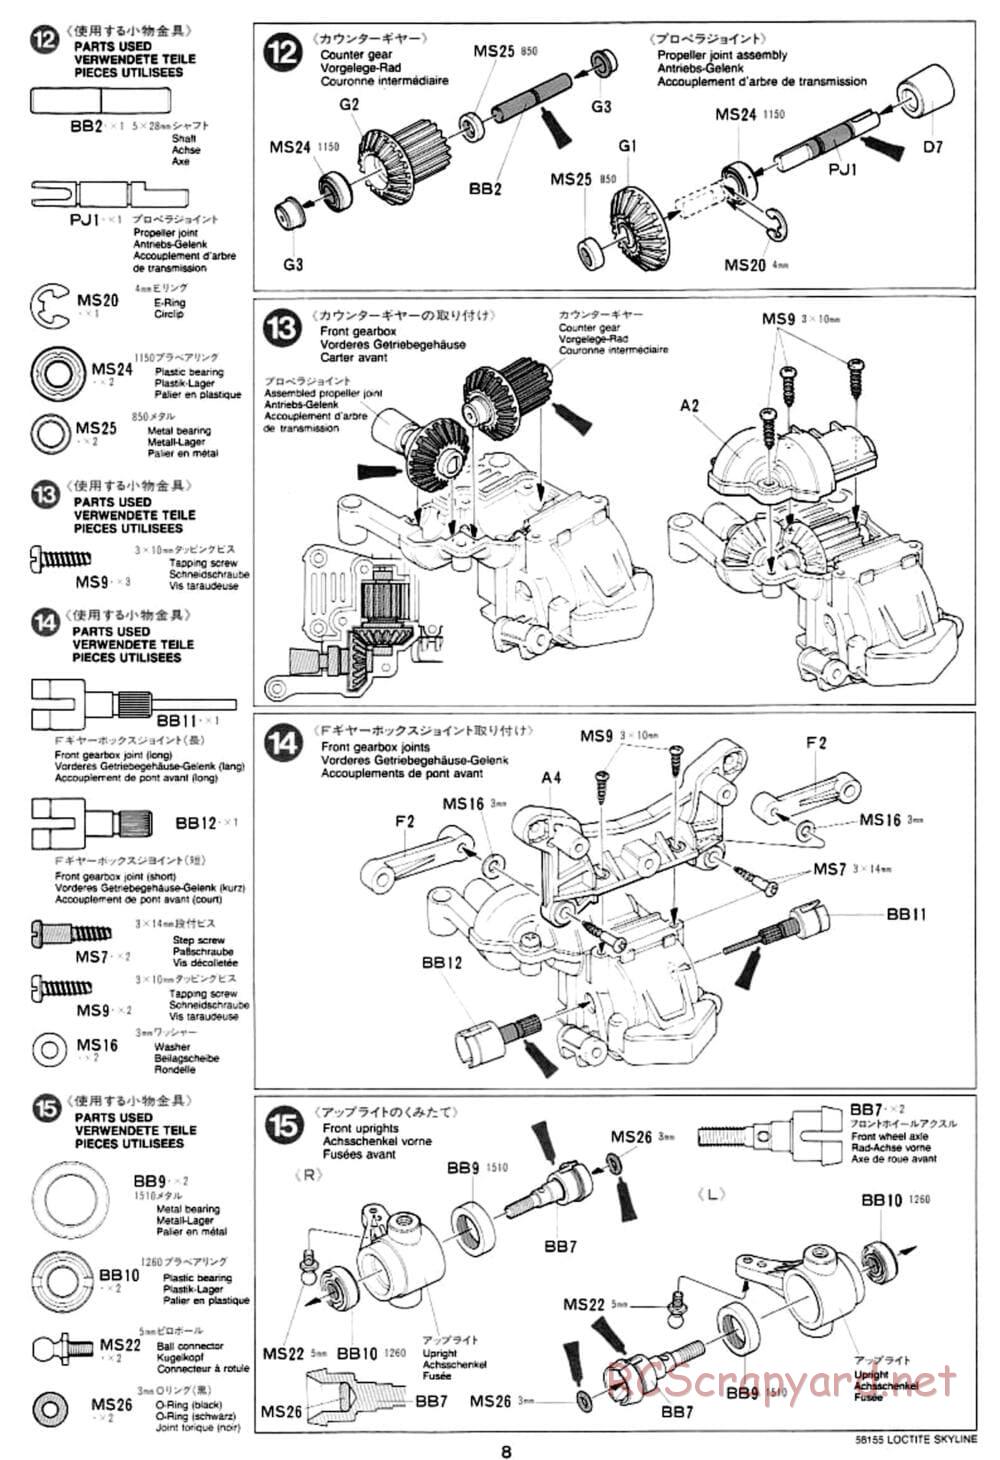 Tamiya - Loctite Nissan Skyline GT-R N1 - TA-02 Chassis - Manual - Page 8